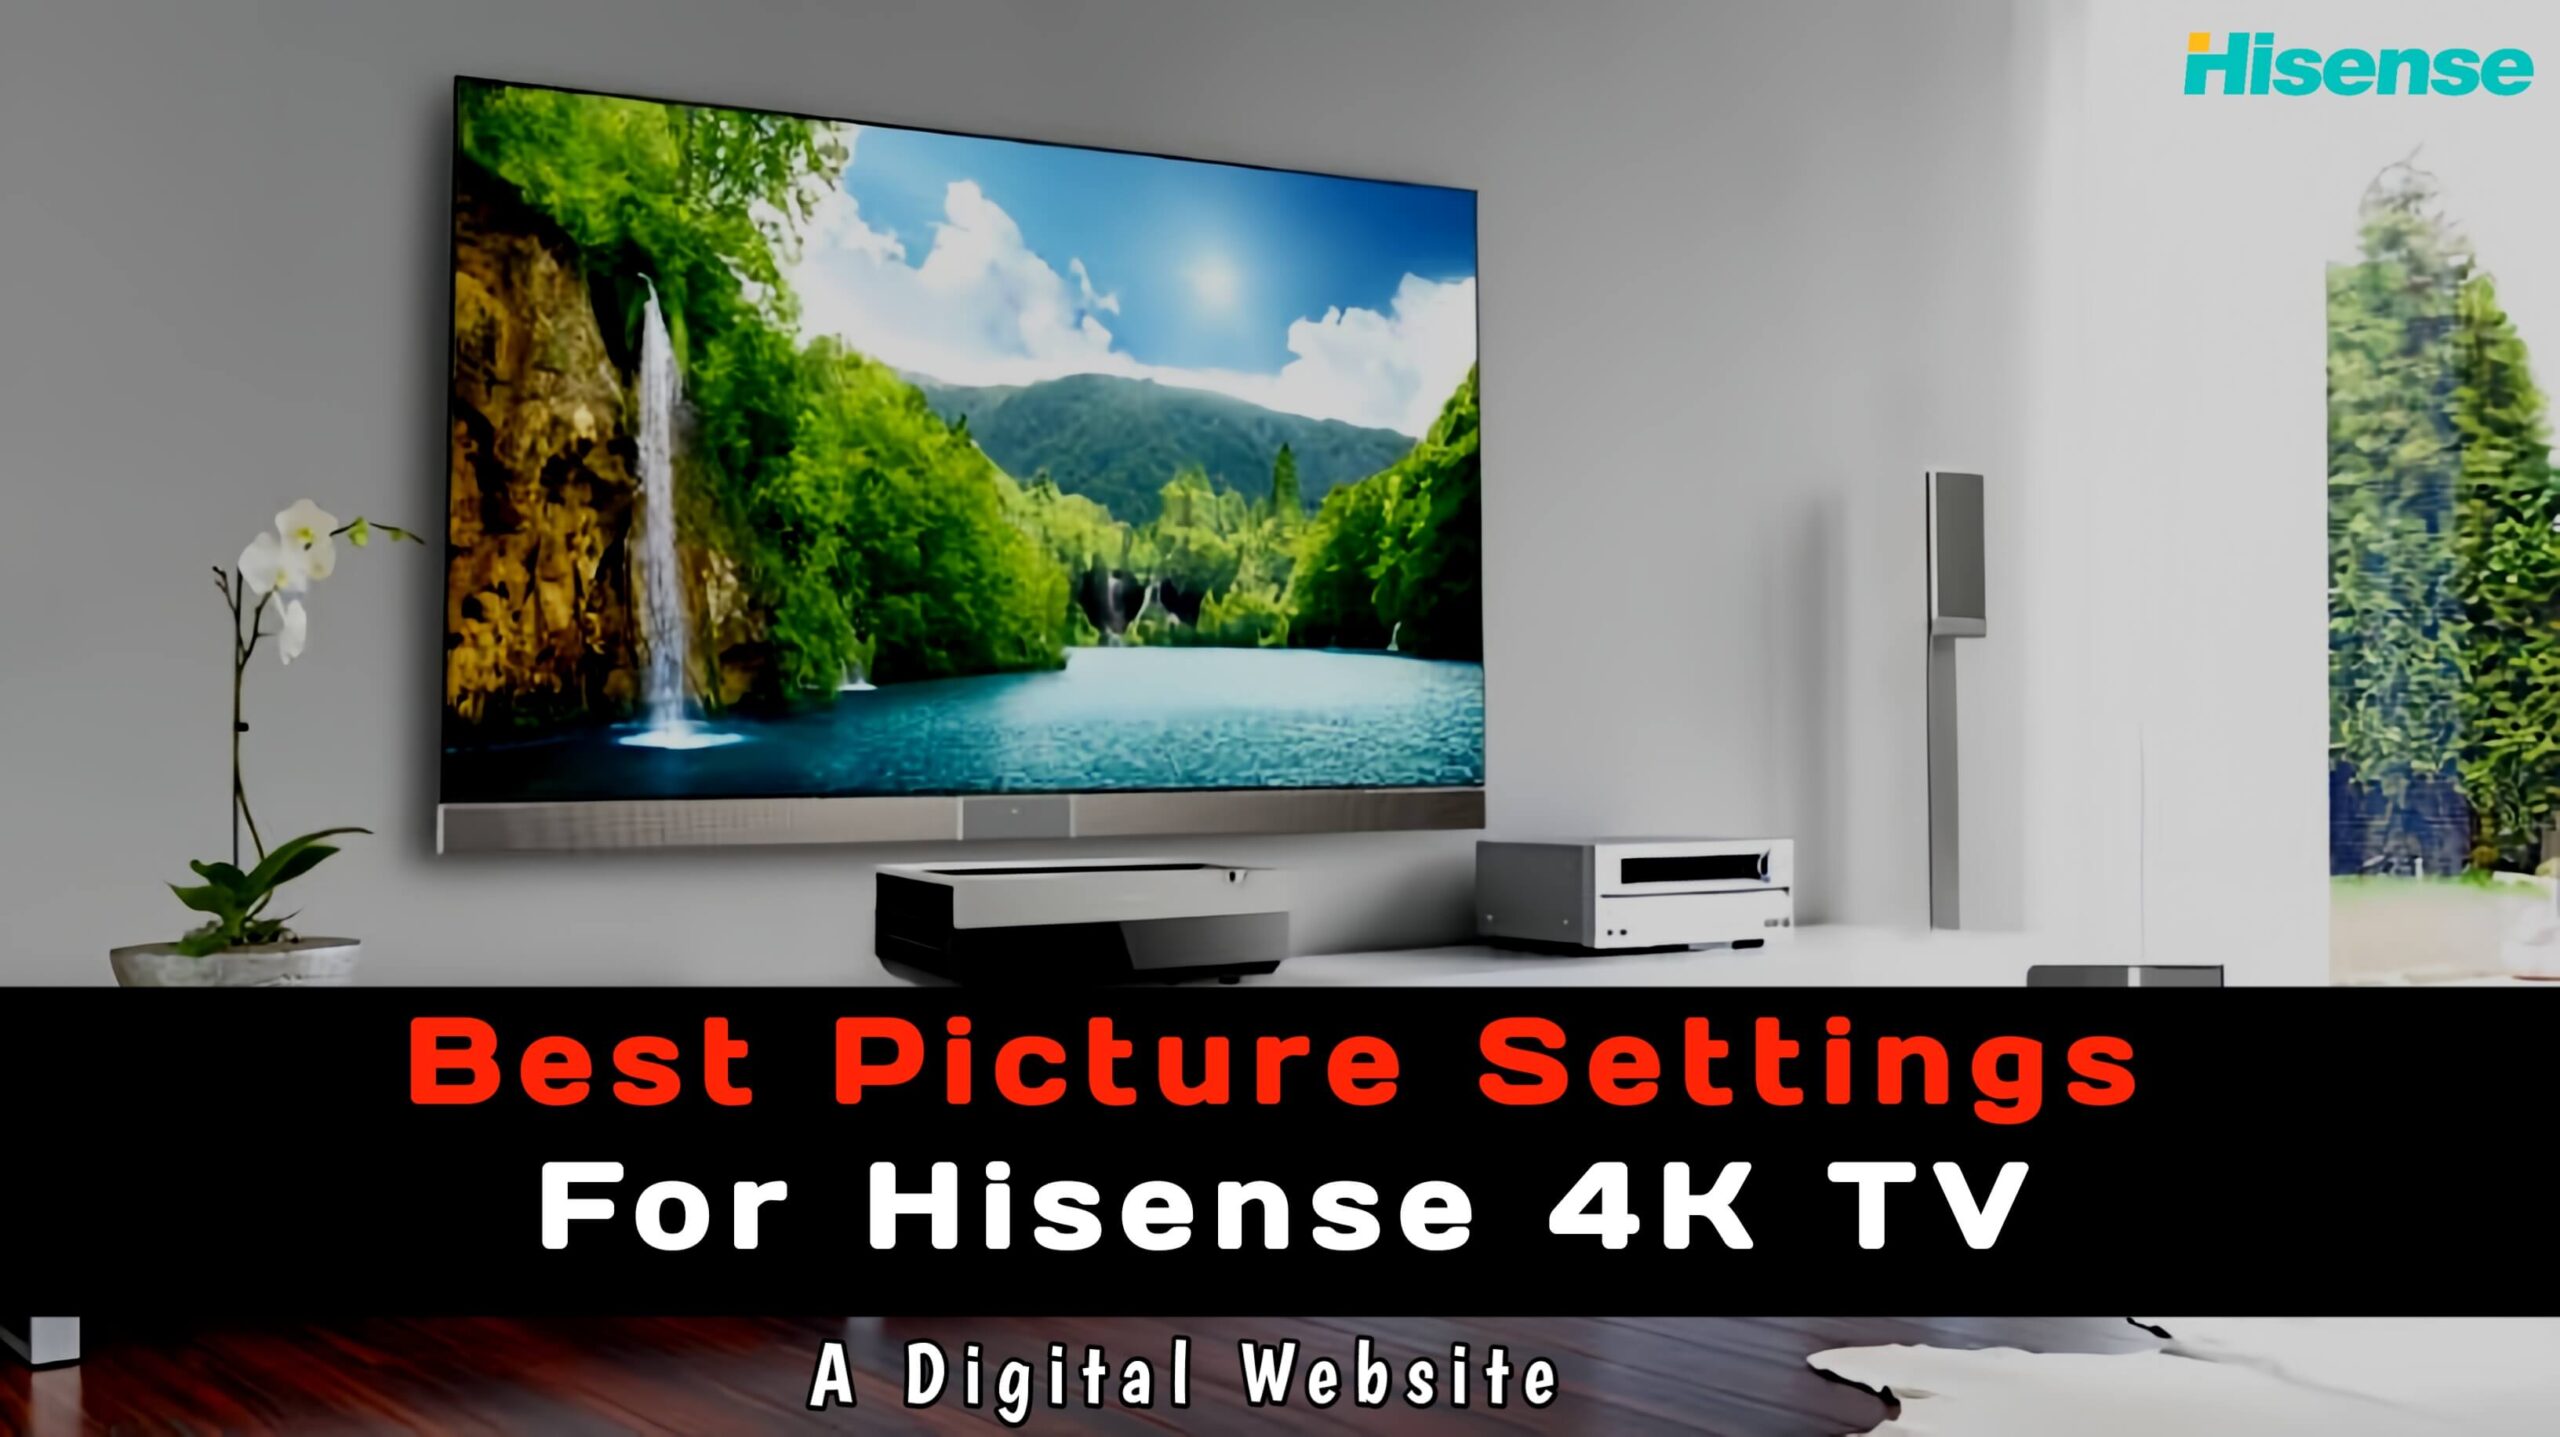 You are currently viewing Best Picture Settings for Hisense 4K TV